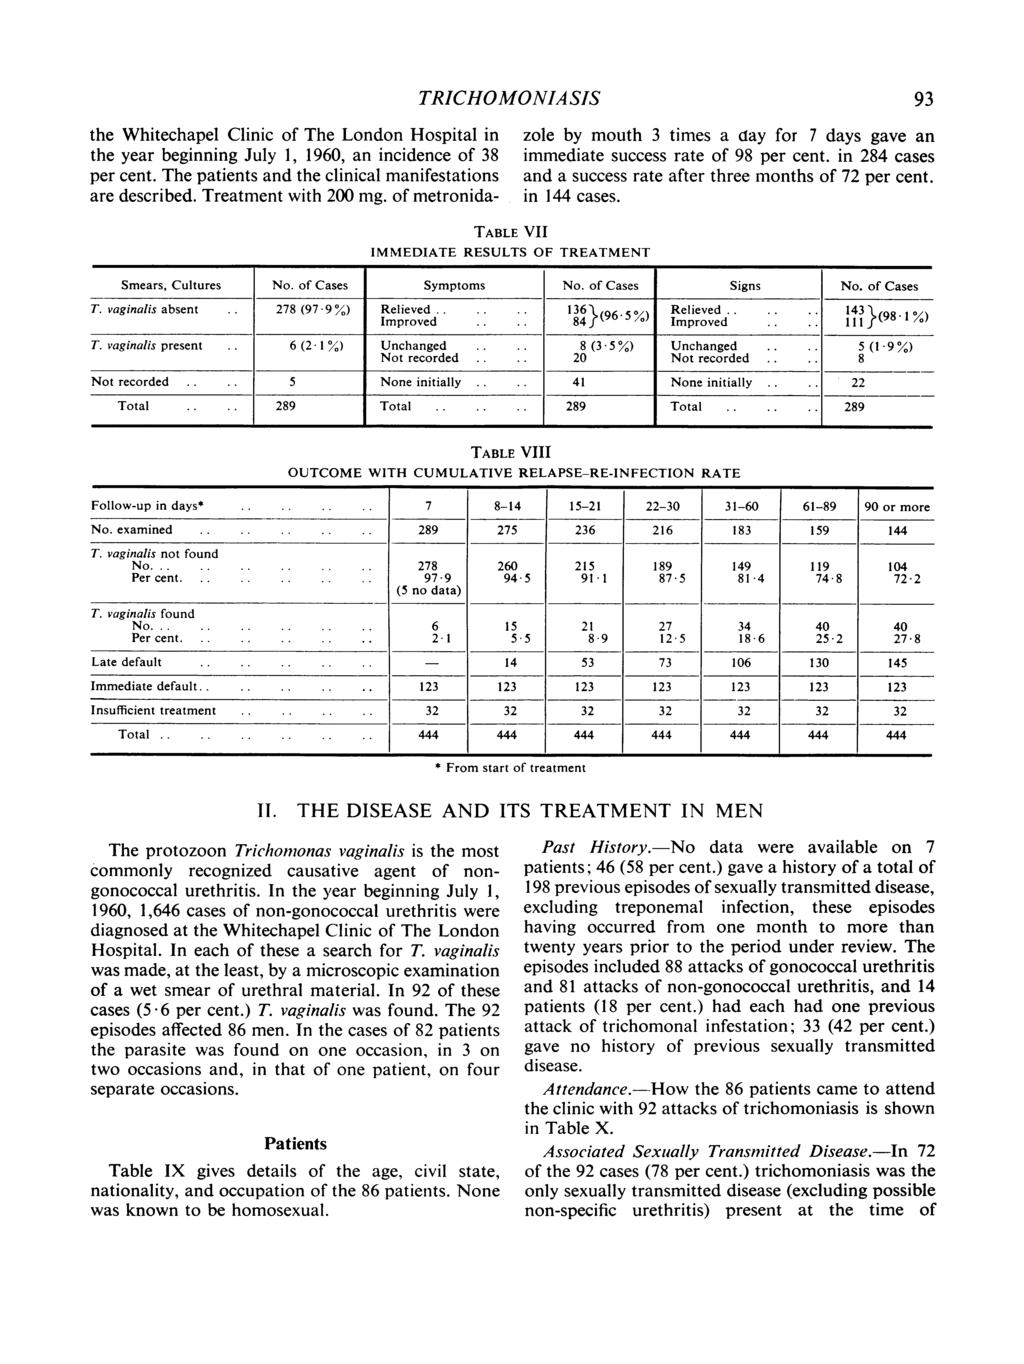 TRICHOMONIASIS TABLE VII IMMEDIATE RESULTS OF TREATMENT the Whitechapel Clinic of The London Hospital in the year beginning July 1, 1960, an incidence of 38 per cent.